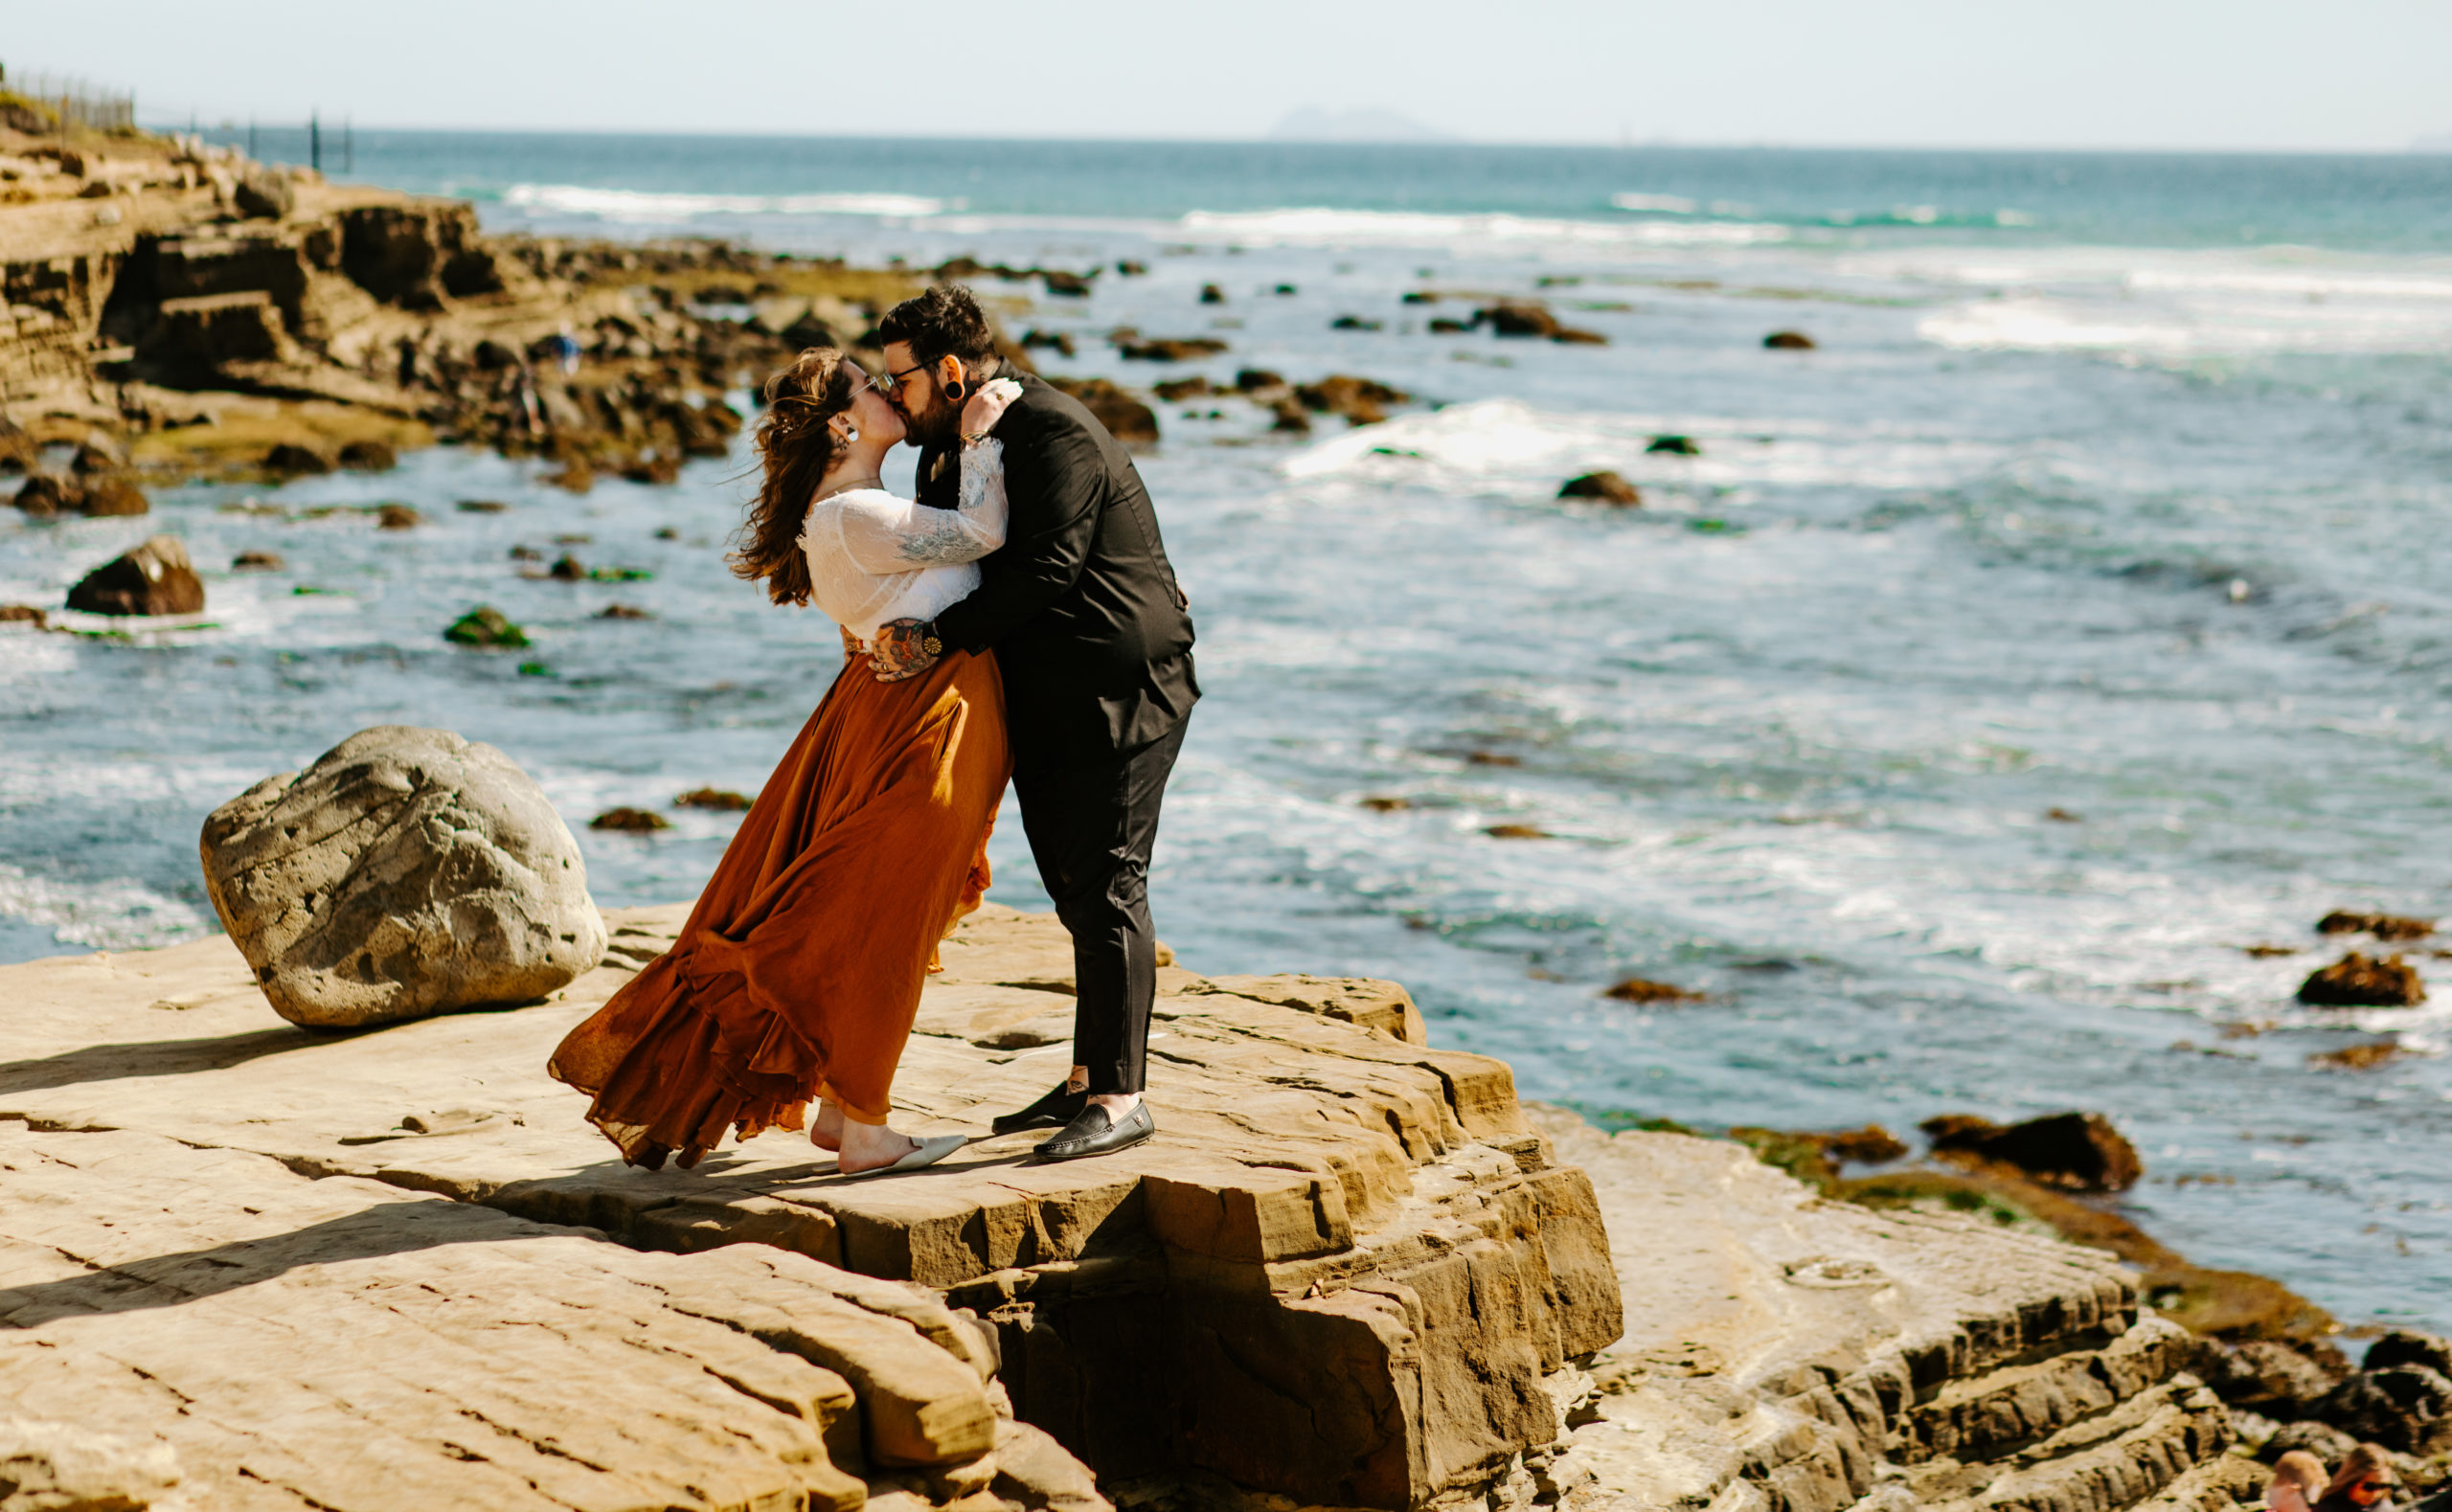 Wedding day photos at Point Loma in San Diego